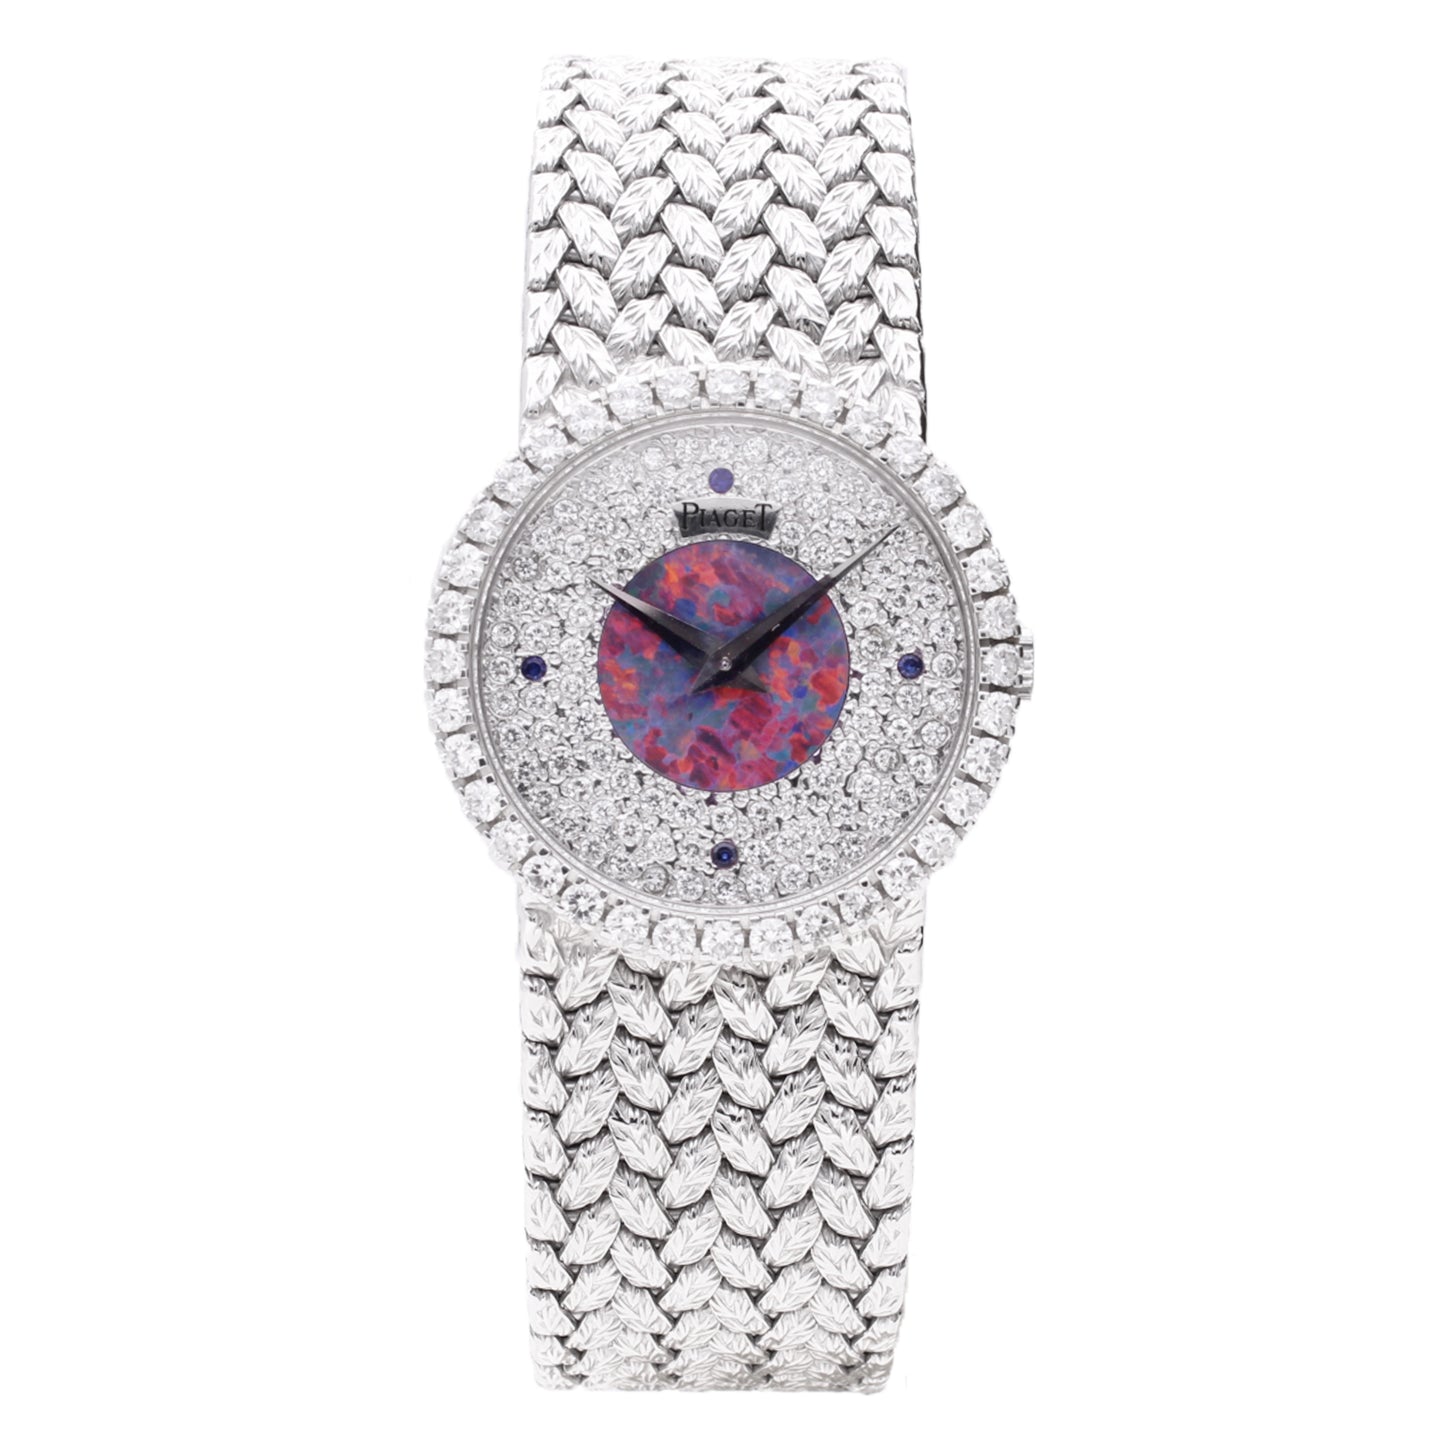 18ct white gold Piaget, opal and pave diamond dial bracelet watch. Made 1970